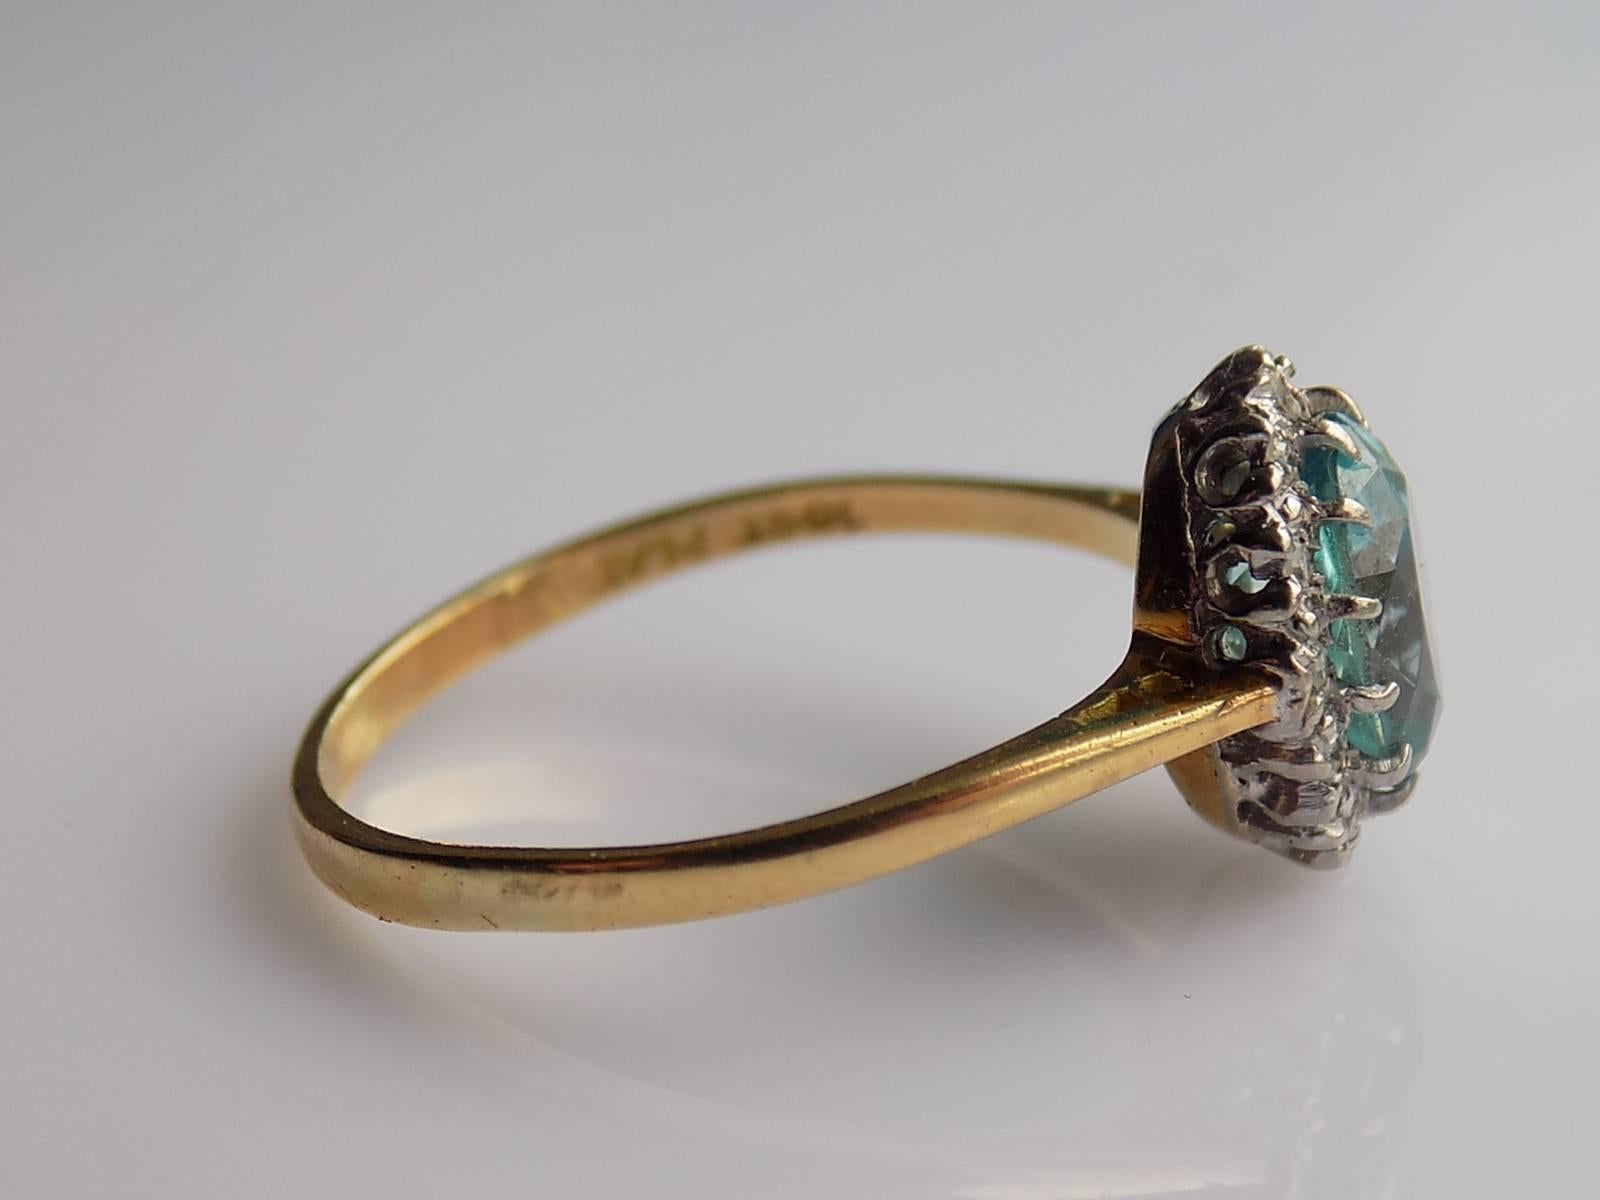 A Lovely Art Deco c.1930s 18 Carat Gold, Platinum, Blue Zircon and Diamond cluster ring. English origin.
Height of the face 11mm.
Zircon 8mm x 6mm approx 2 Carat.
Weight 2.9gr.
Size O UK, 7.5 US
Marked: 18CT PLAT for 18 Carat Gold and Platinum.